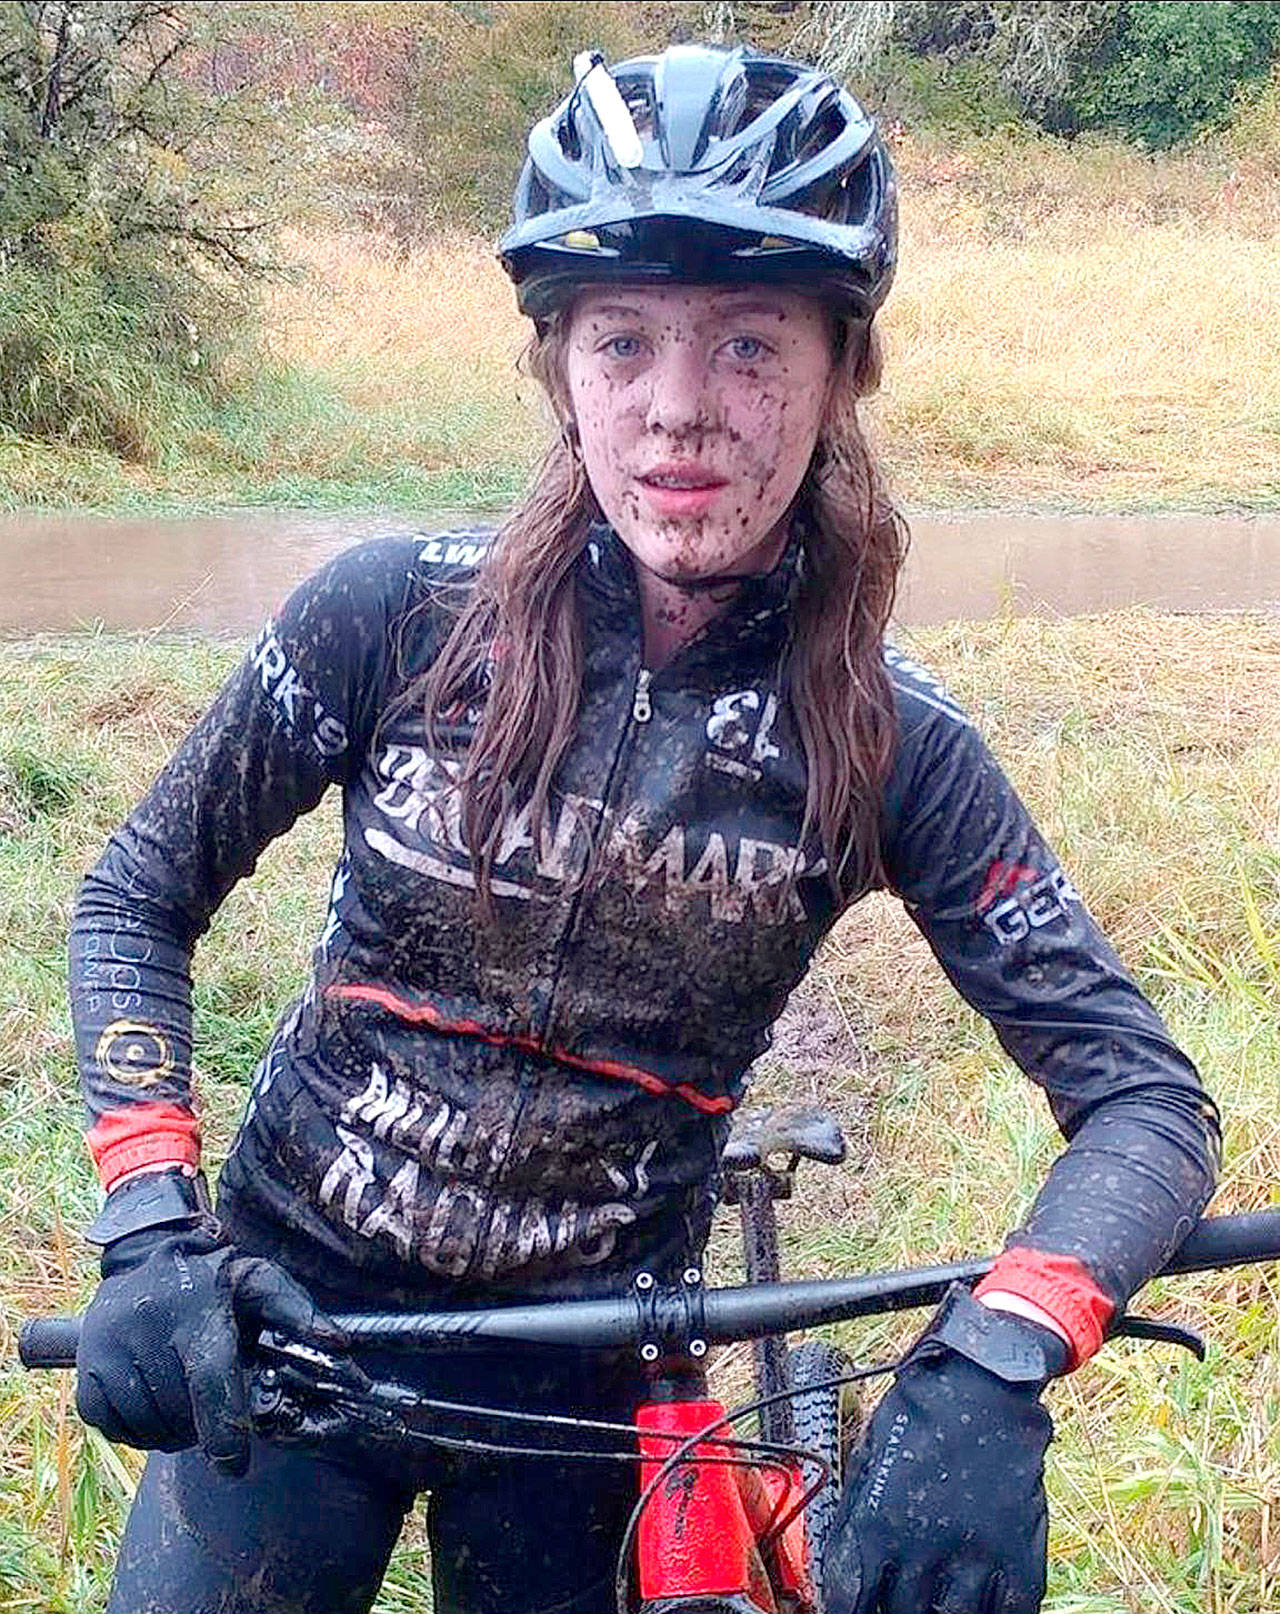 Muddy but happy, Makenna Gary poses for a post-race photo. (Courtesy Photo)                                Muddy but happy, Makenna Gary poses for a post-race photo. (Courtesy Photo)